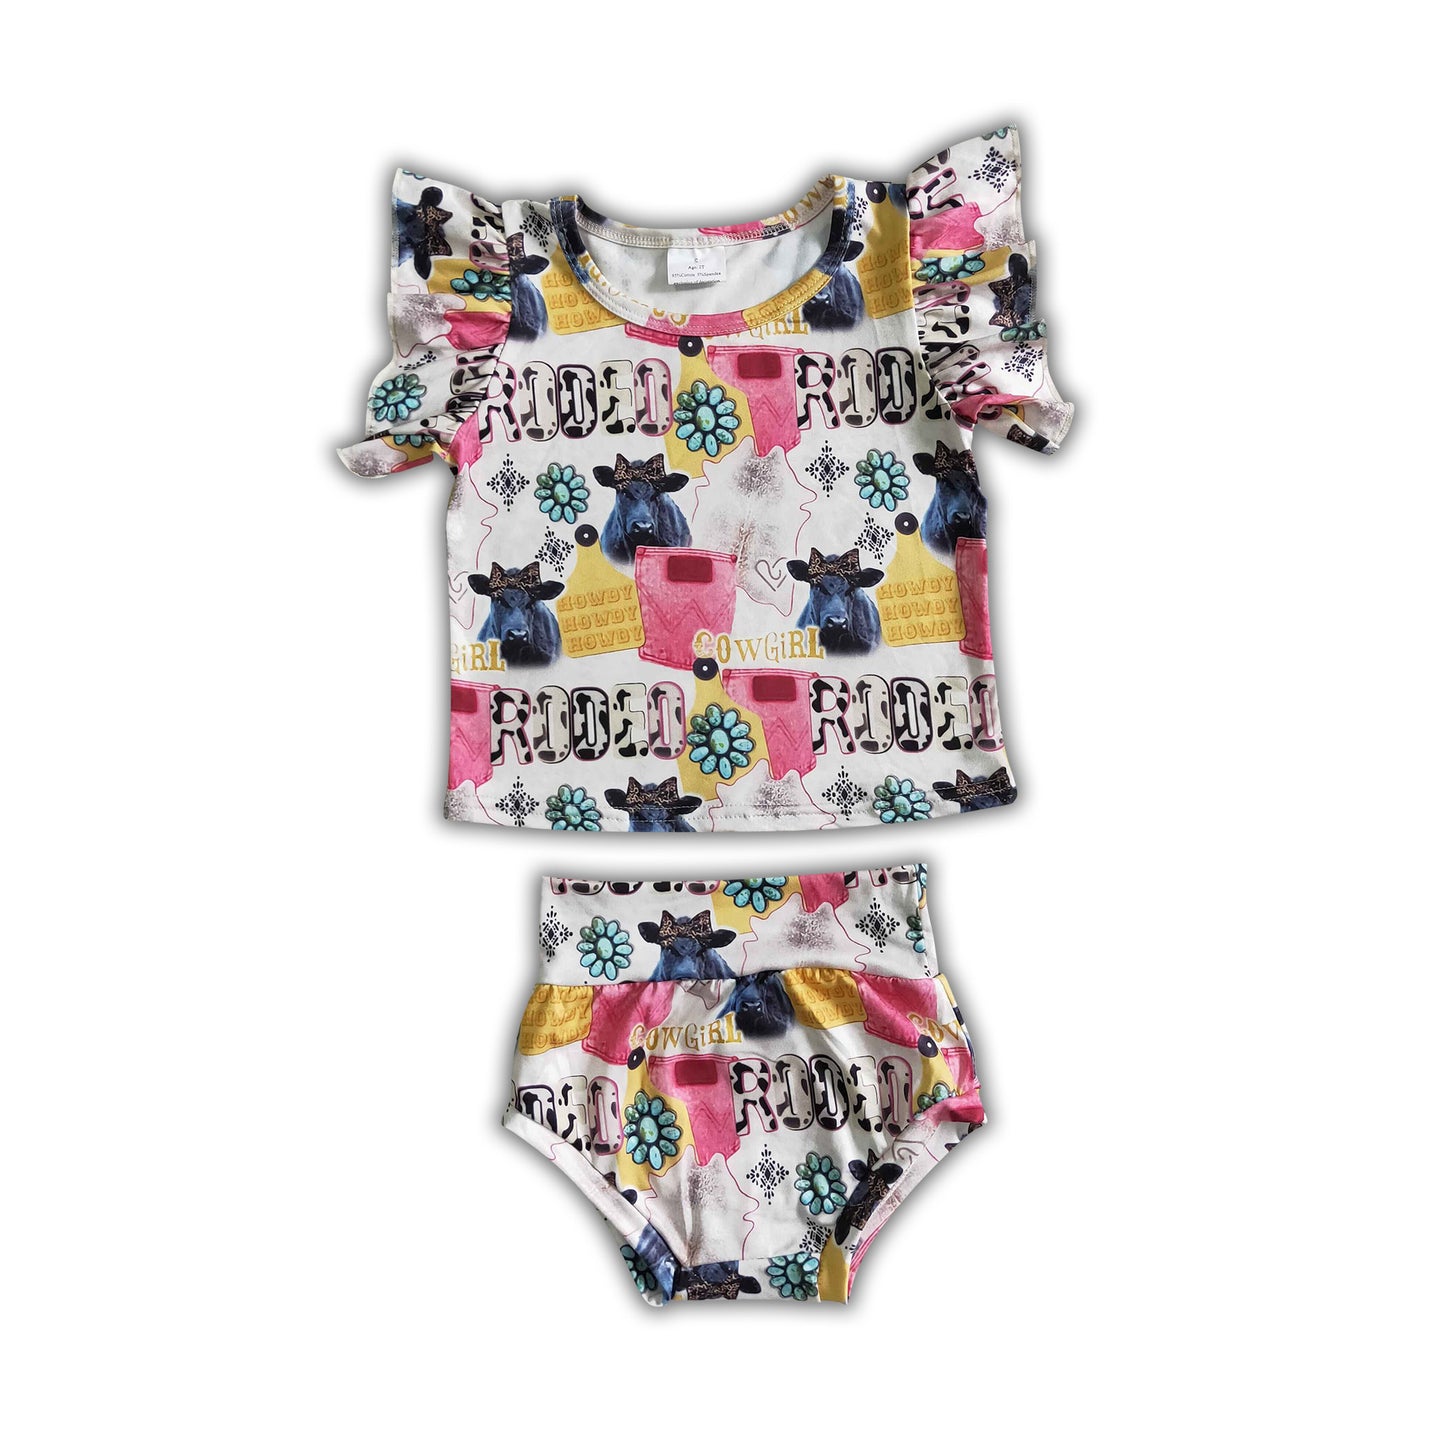 Rodeo cowgirl baby bummies set